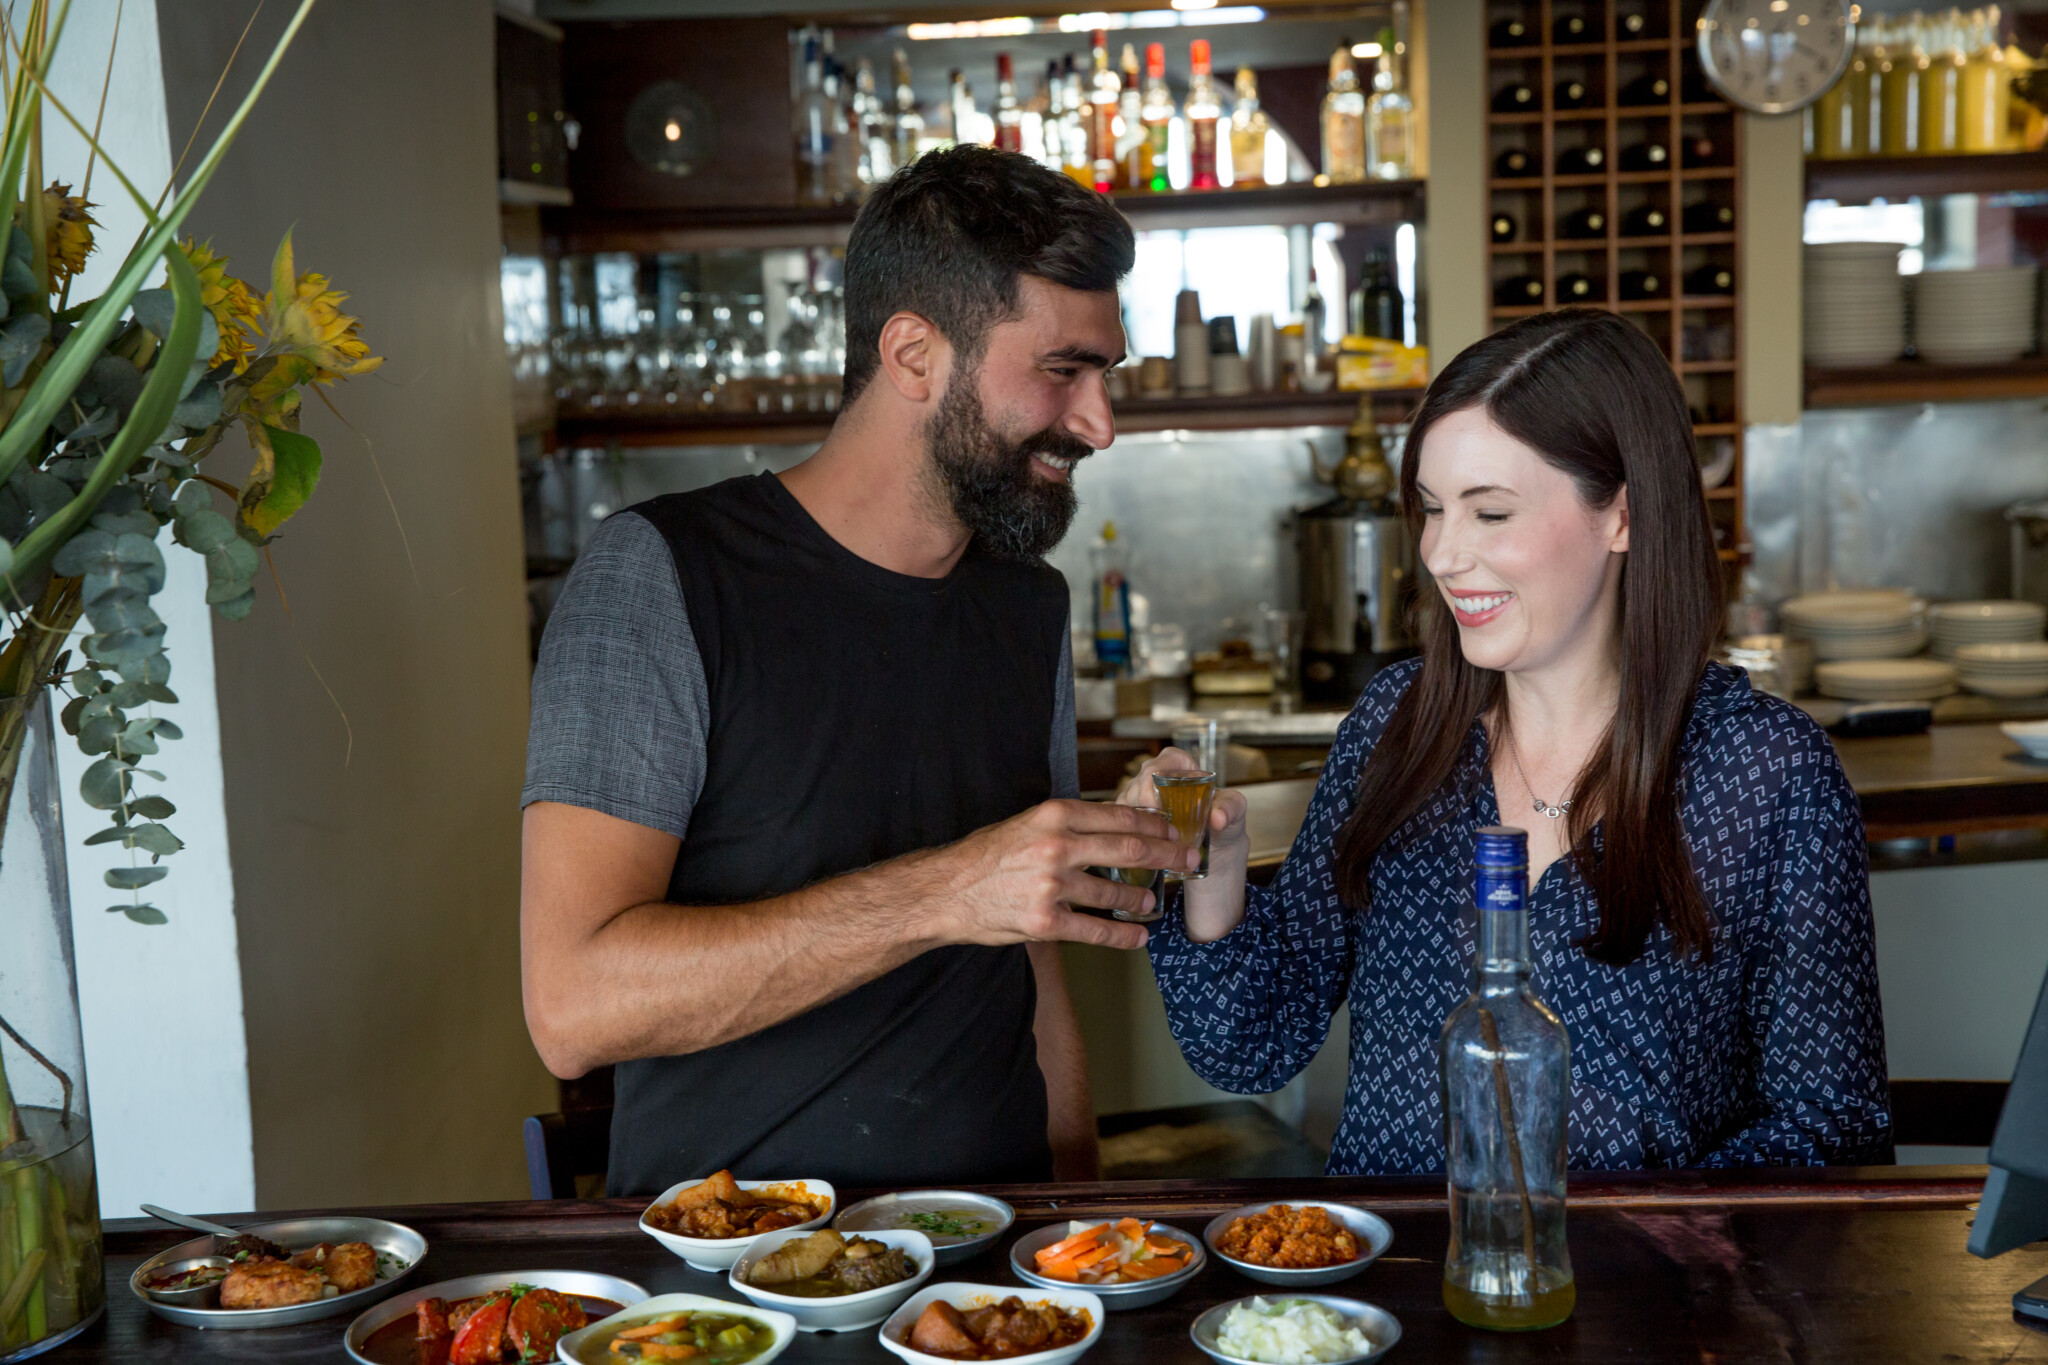 Tori Avey at Guetta Restaurant in Jaffa, Israel, toasting the owner of the restaurant over a table of many delicious Tripolitandishes.